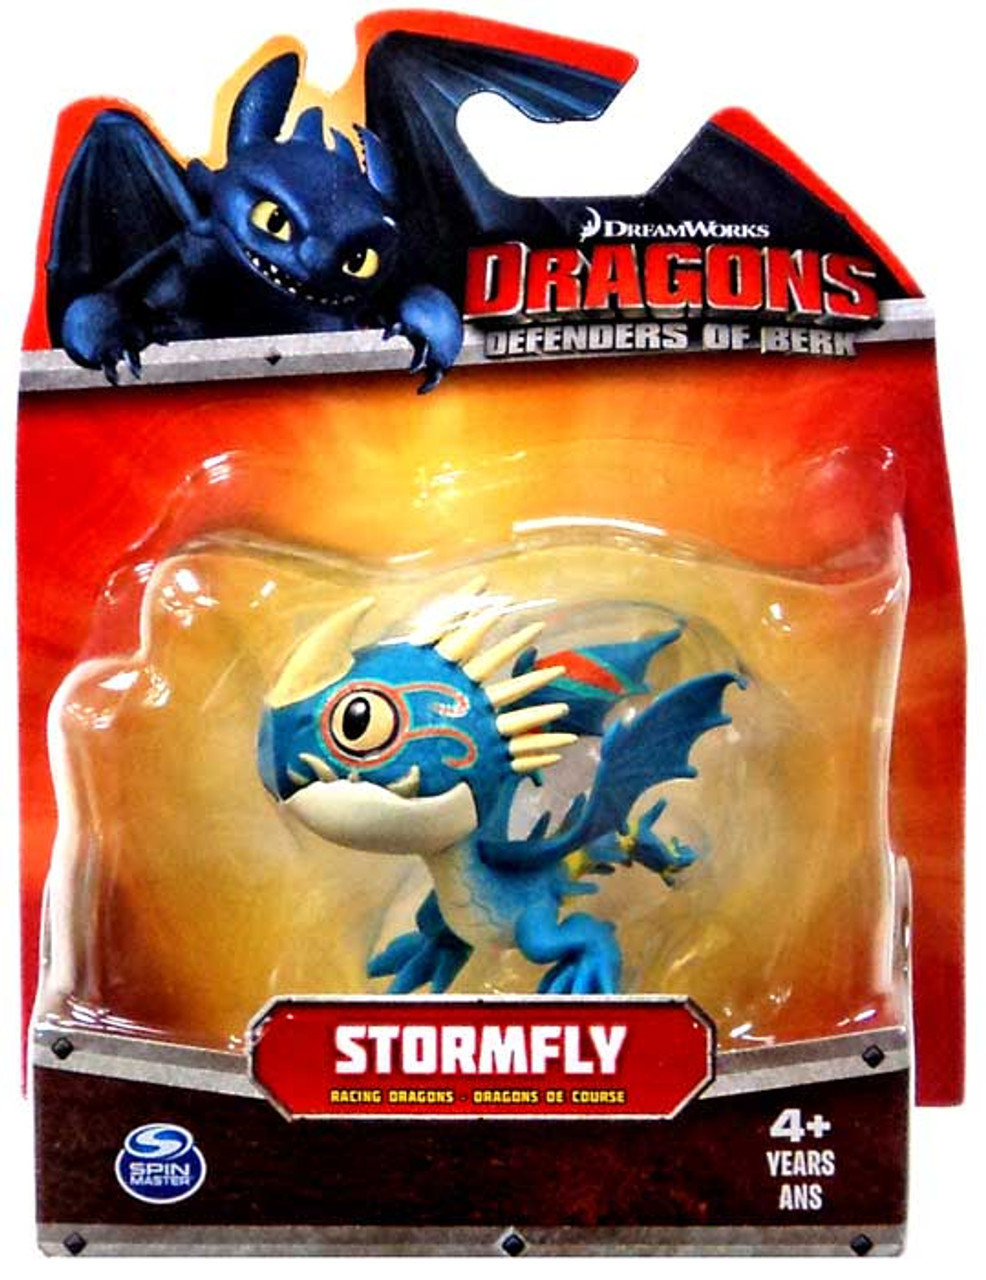 How to Train Your Dragon Defenders of Berk Stormfly 3 Mini Figure Spin ...